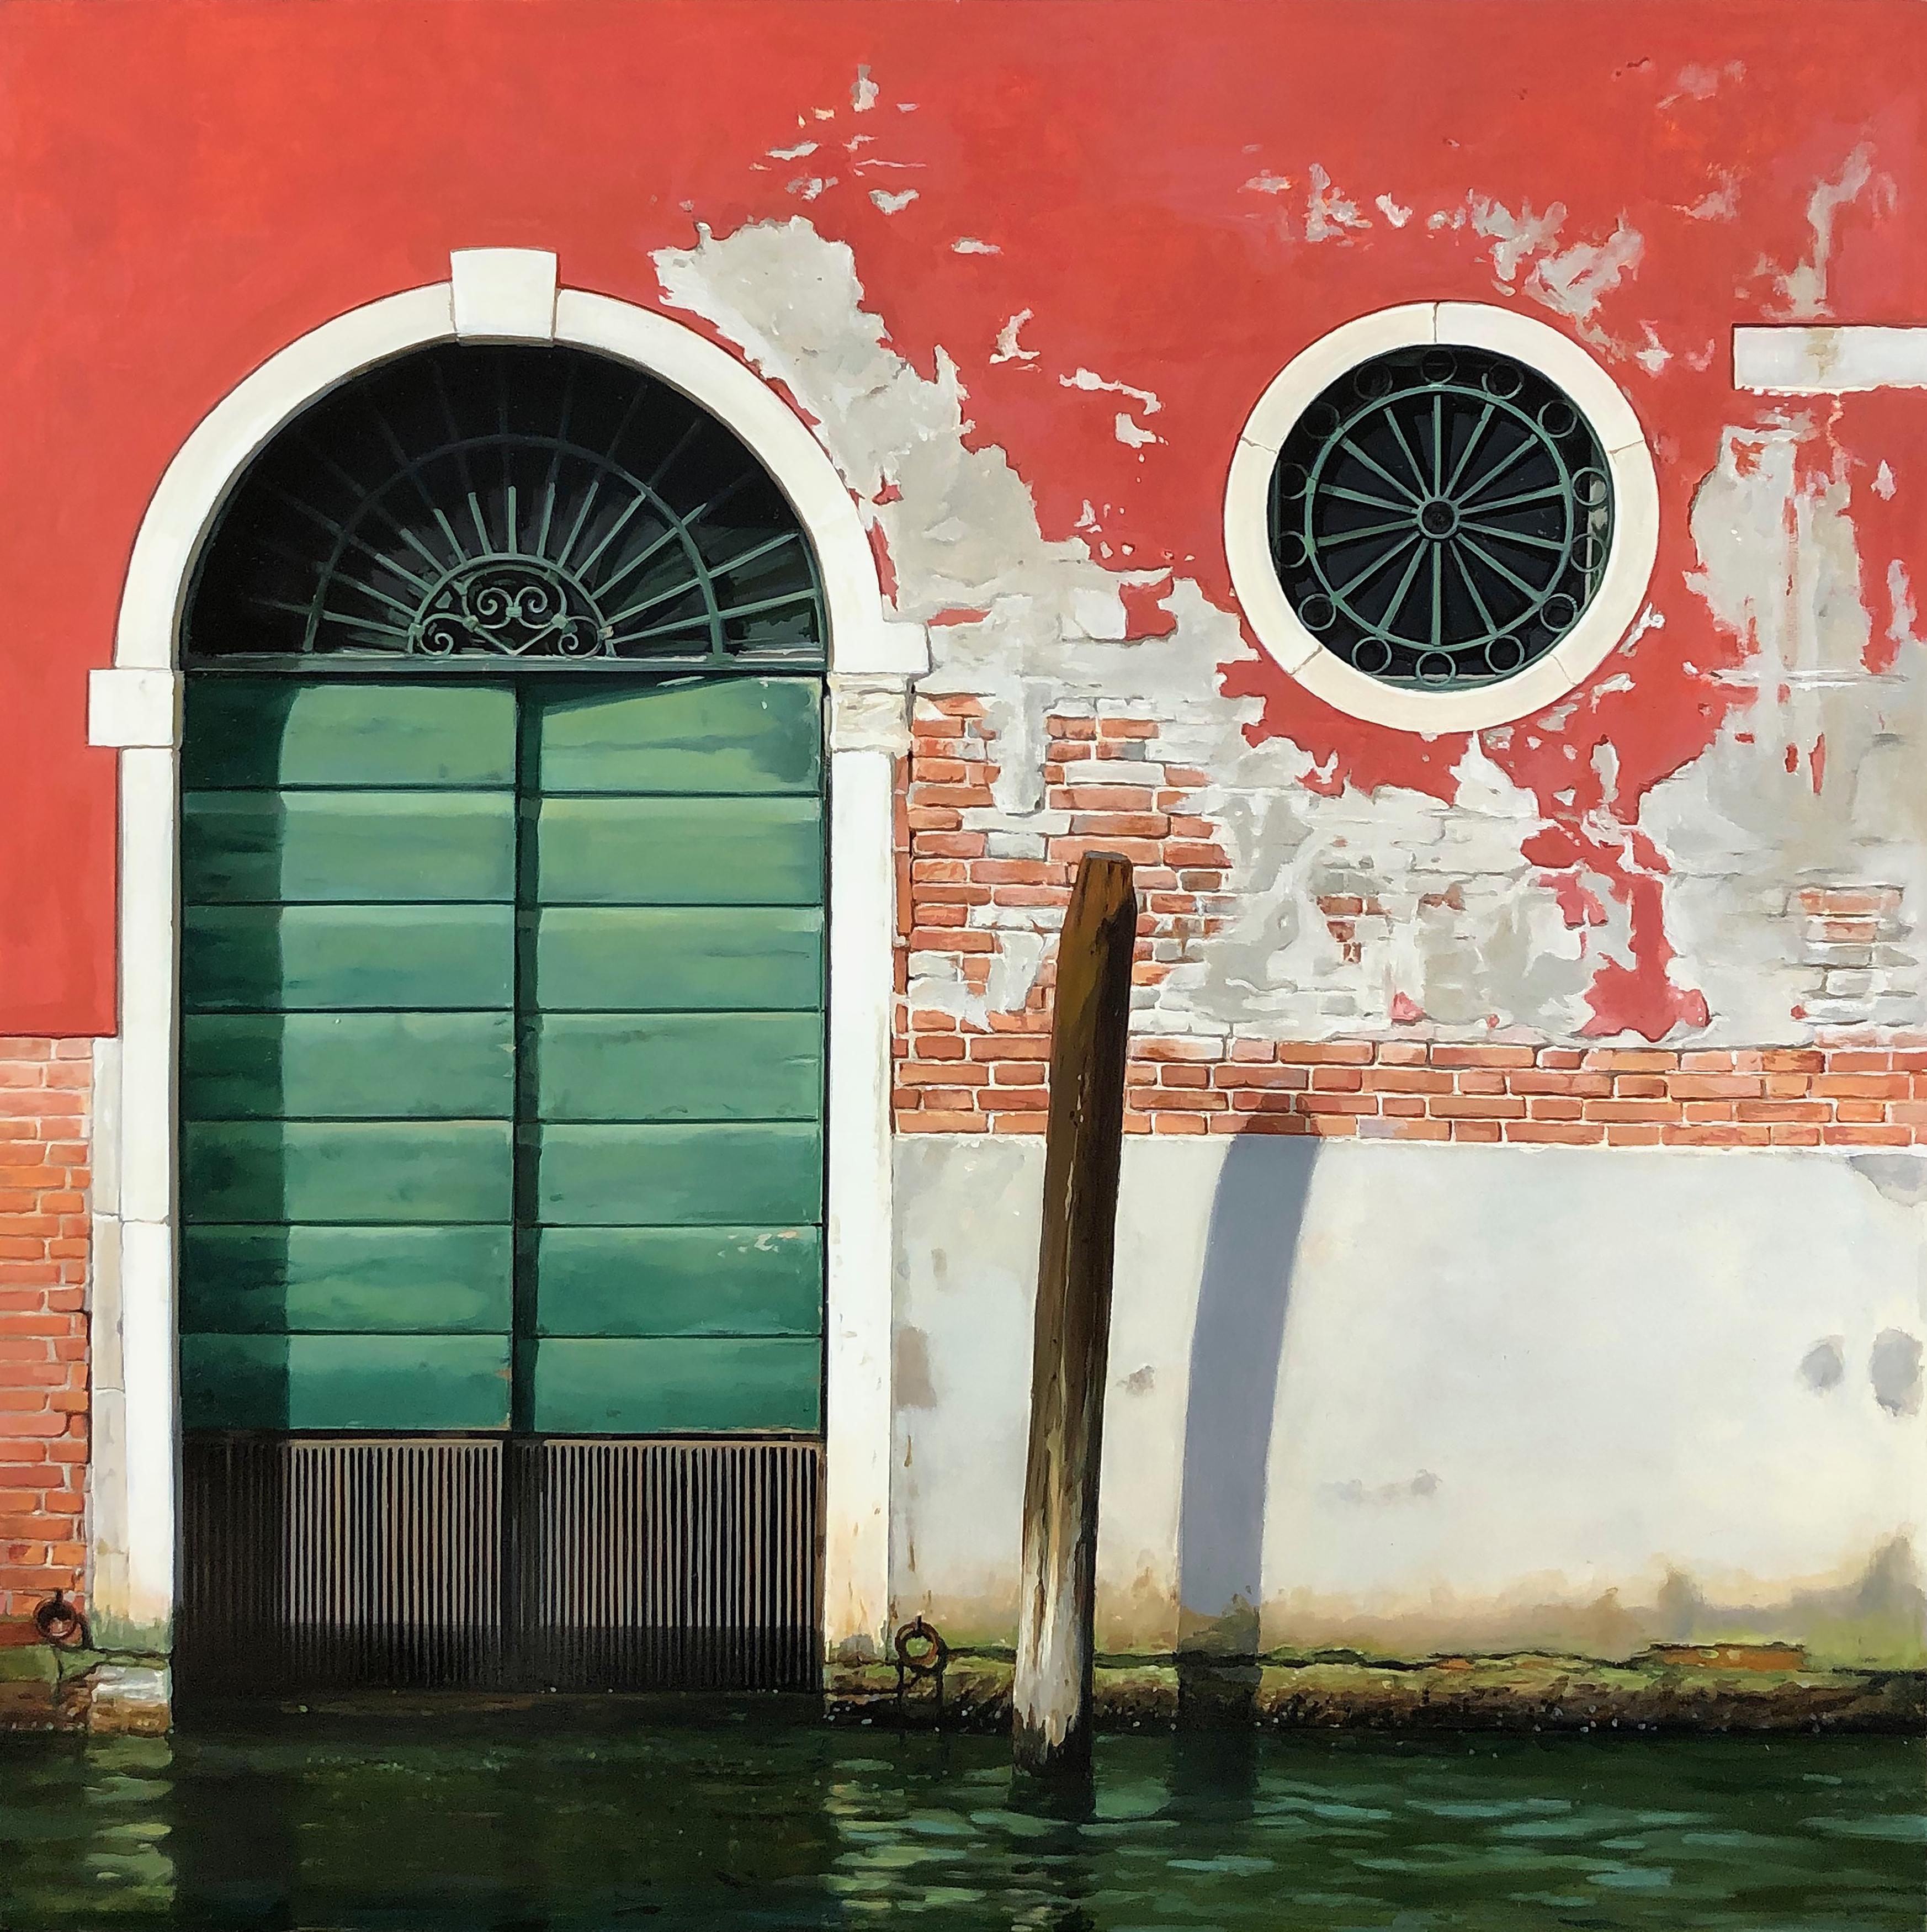  Acqua in Aumento (Rising Water) - Architectural Venetian Water Scene, Original - Painting by Carol Pylant